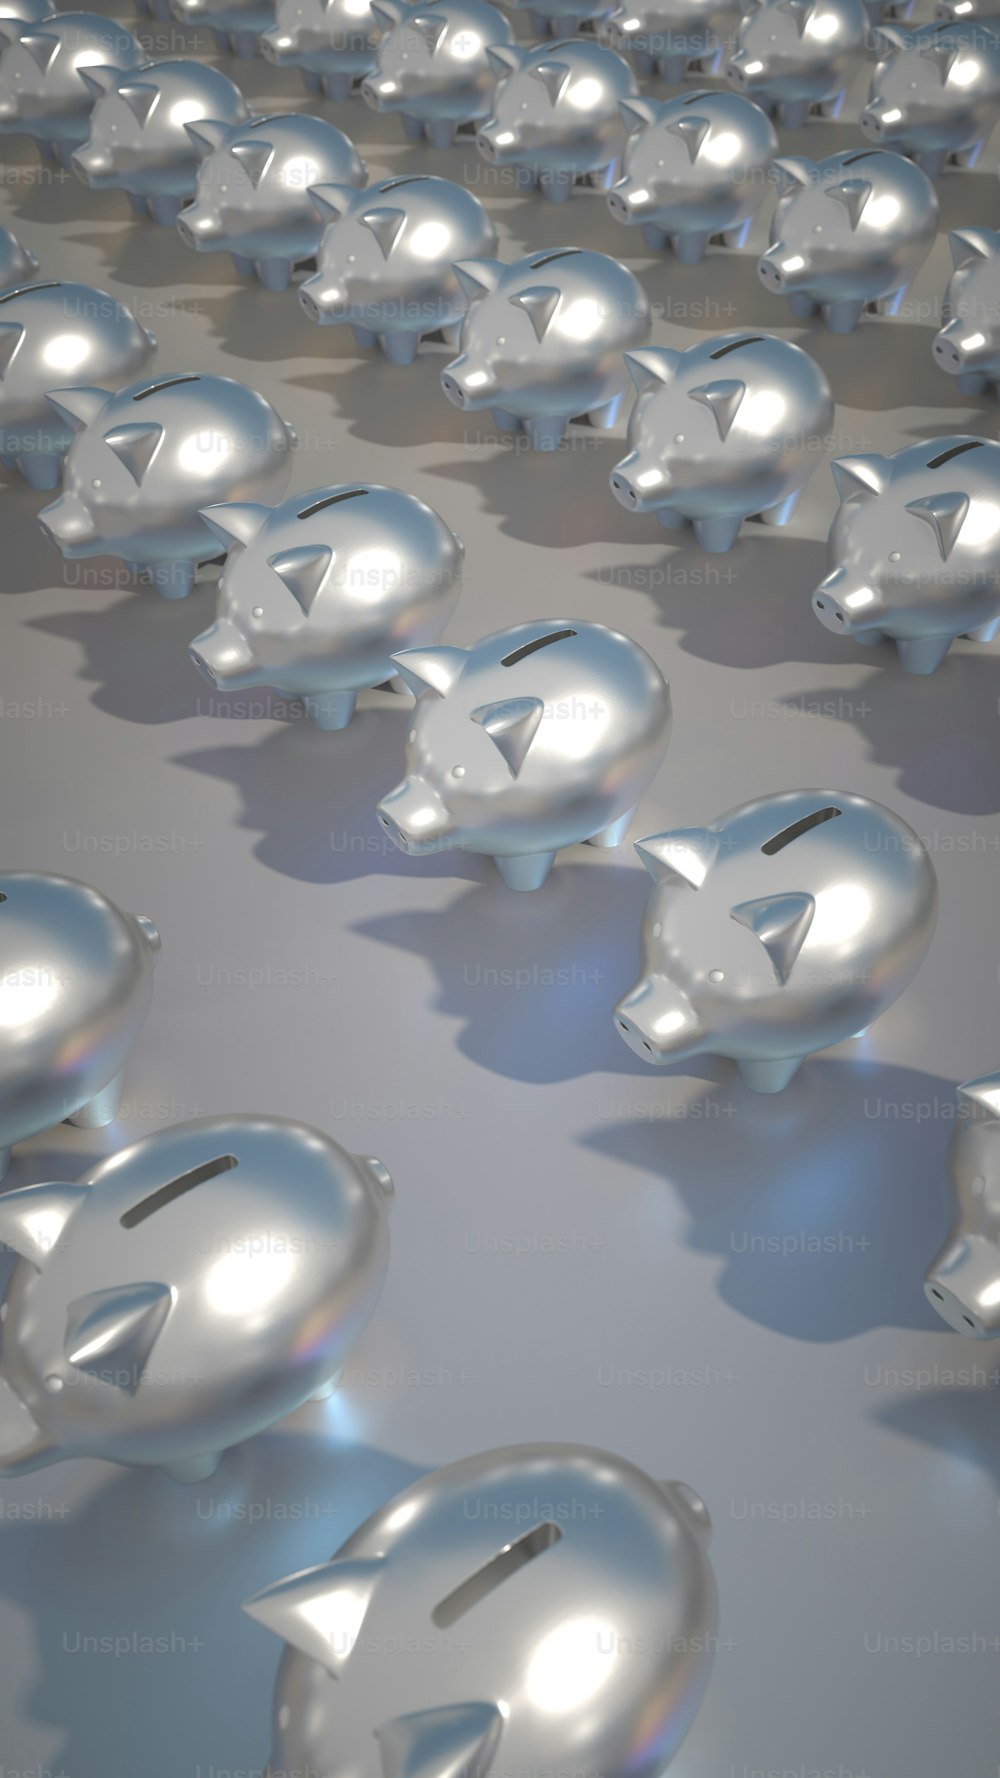 a large group of shiny silver objects on a gray surface